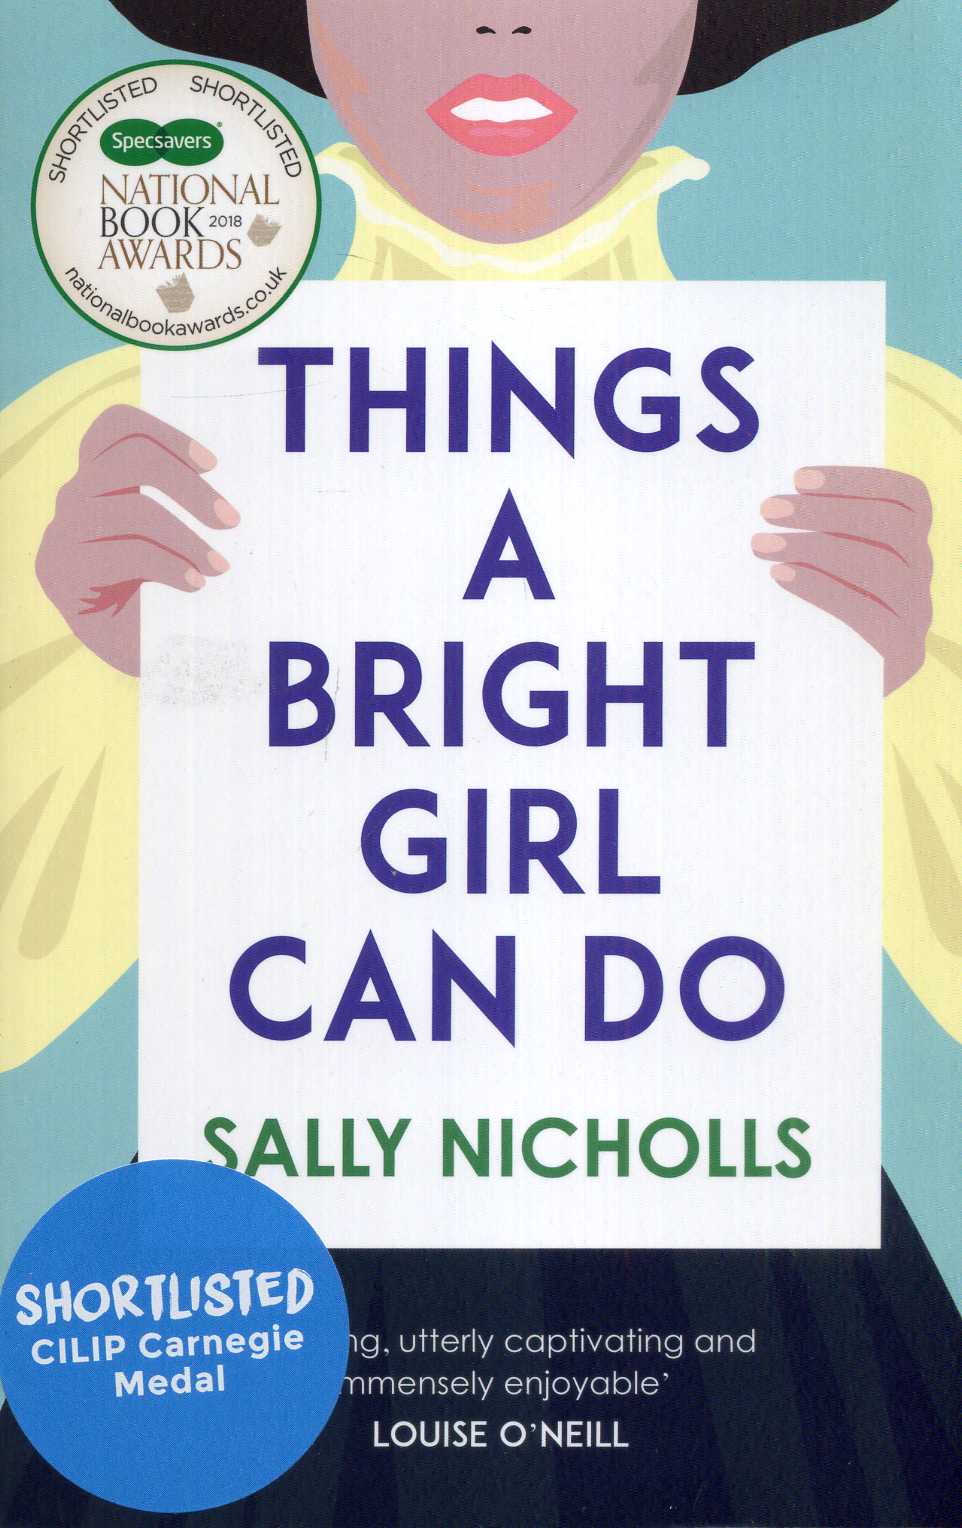 Things A Bright Girl Can Do **Shortlisted For The Carnegie Medal**